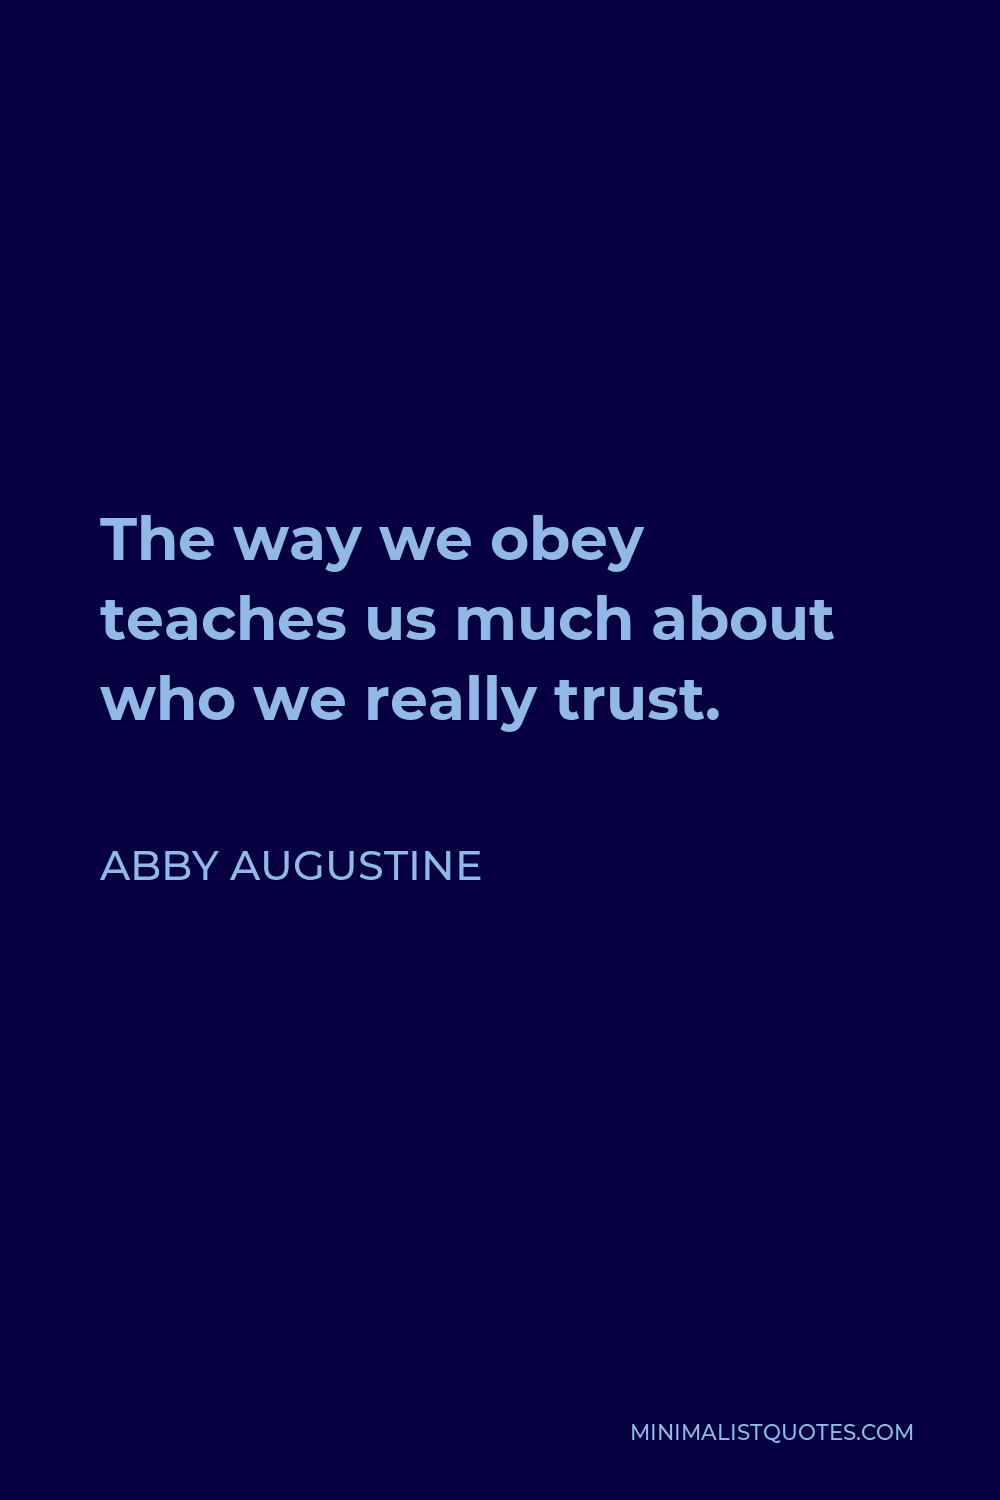 Abby Augustine Quote - The way we obey teaches us much about who we really trust.